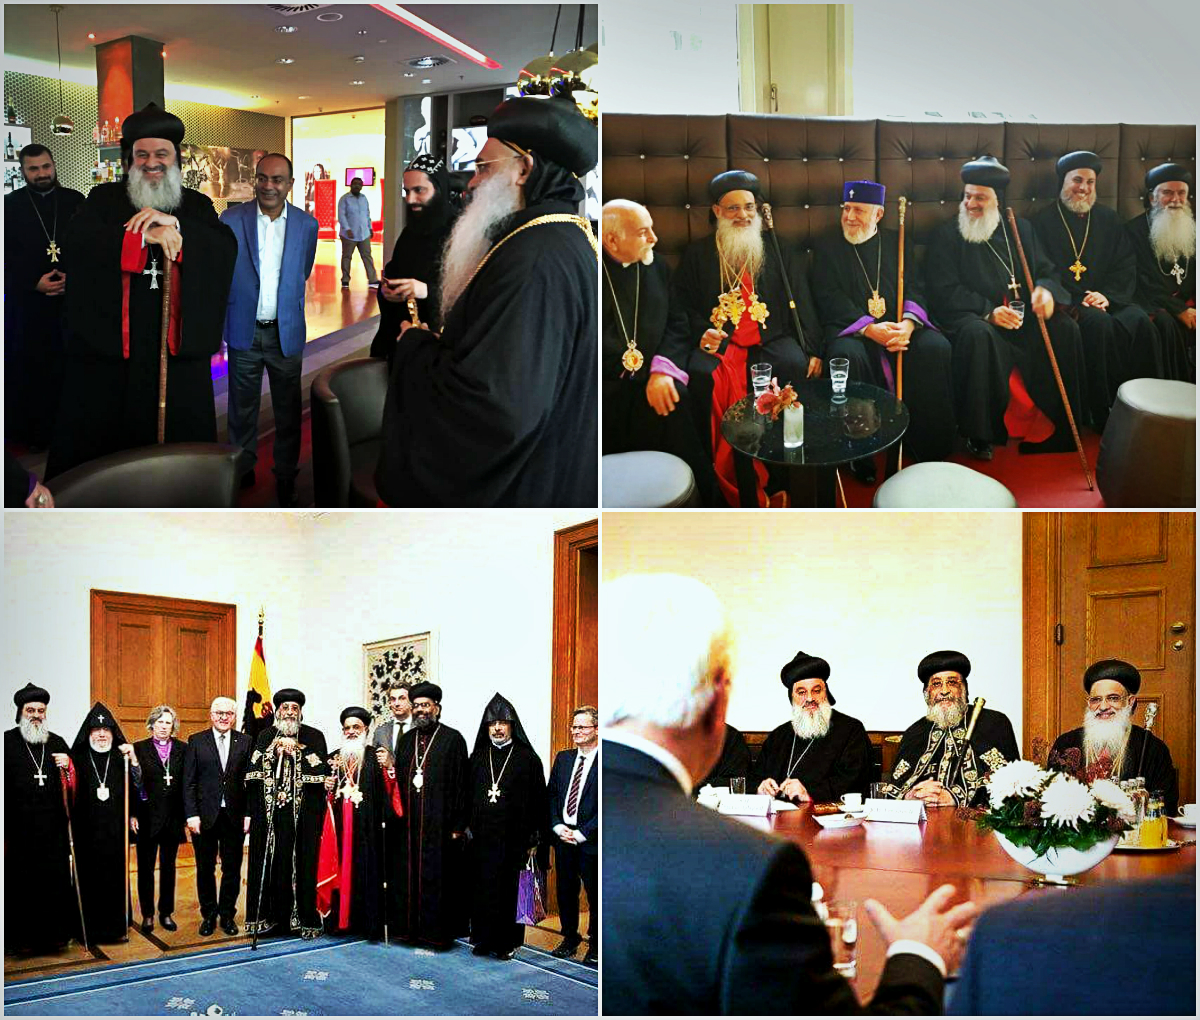 A Review on the Gathering of Oriental Orthodox Primates in Germany